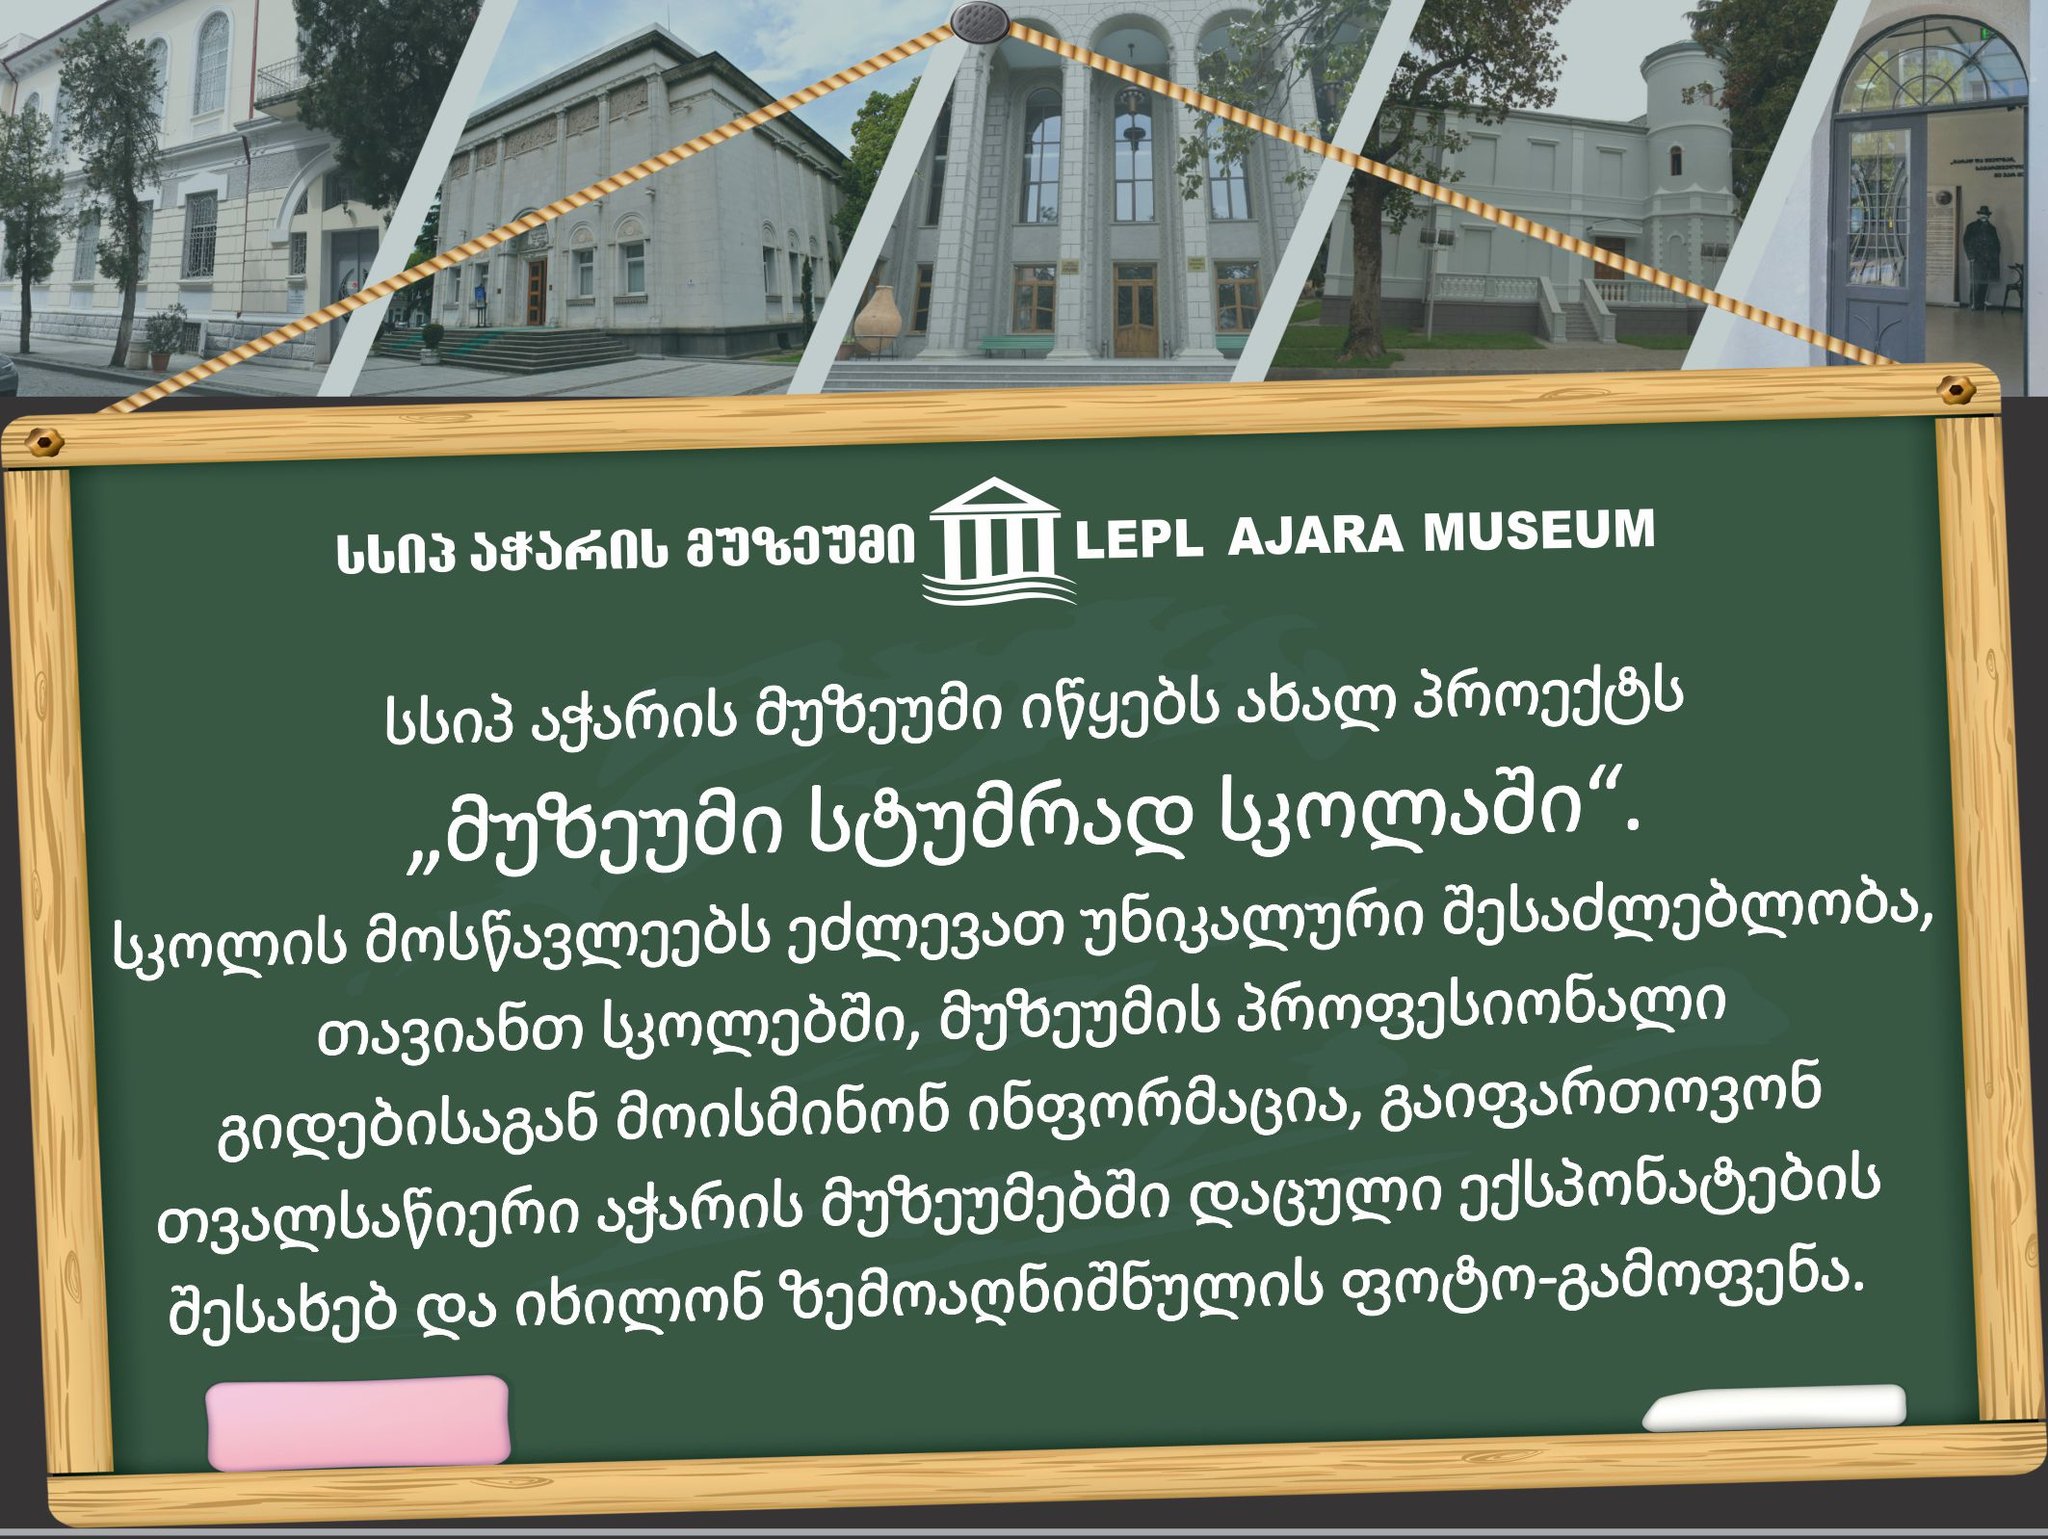 New project - "Museum as a guest in school".